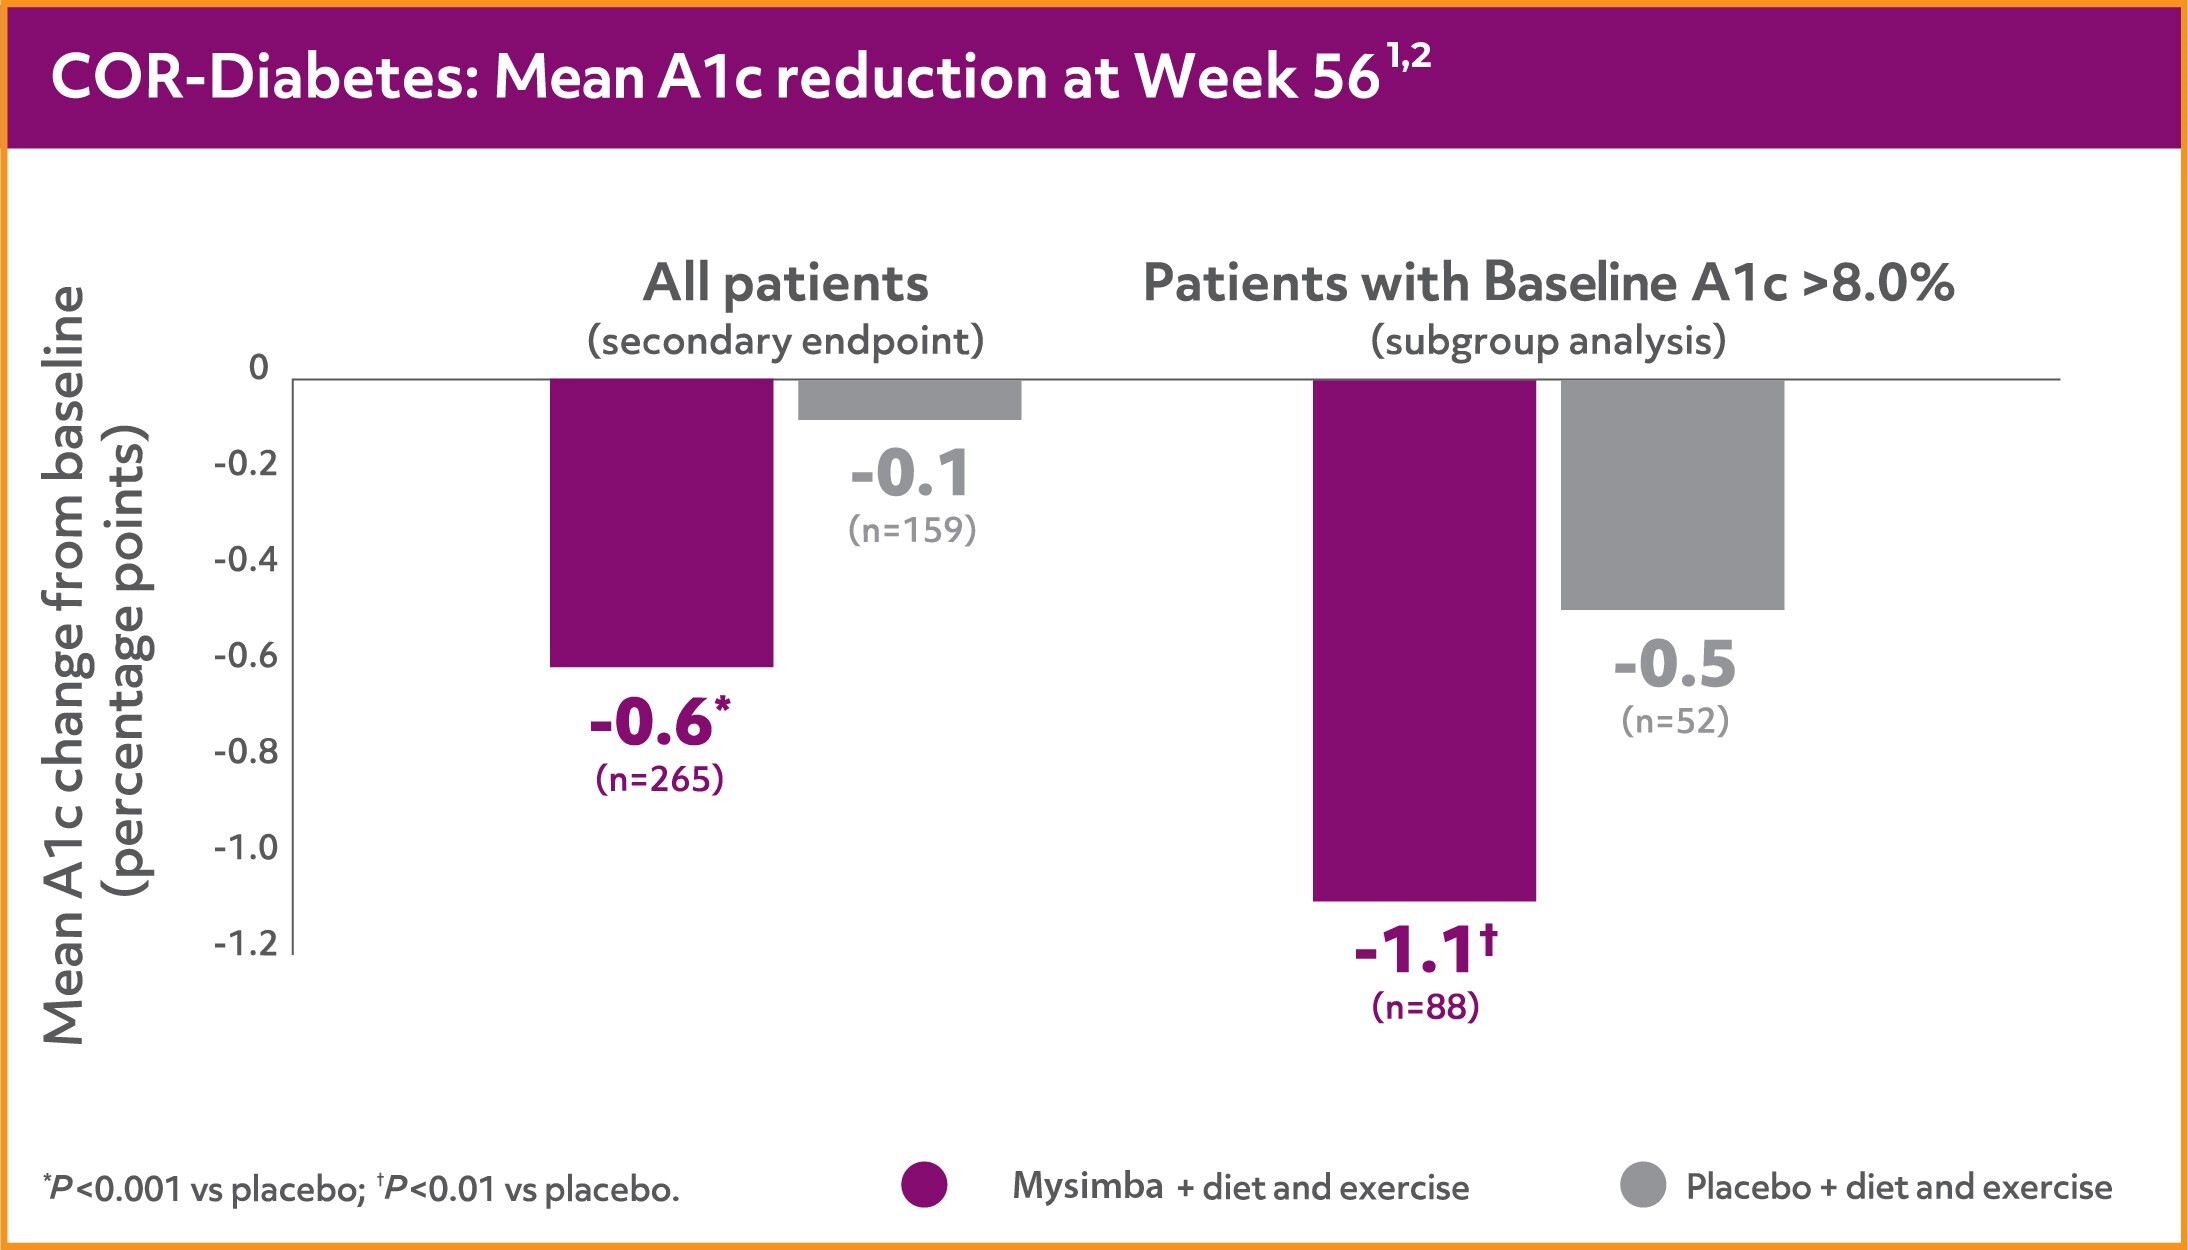 A bar chart that shows the mean A1c reduction at Week 56 from the COR-Diabetes clinical study. The axis of the chart is vertical and the bars are purple and grey. 